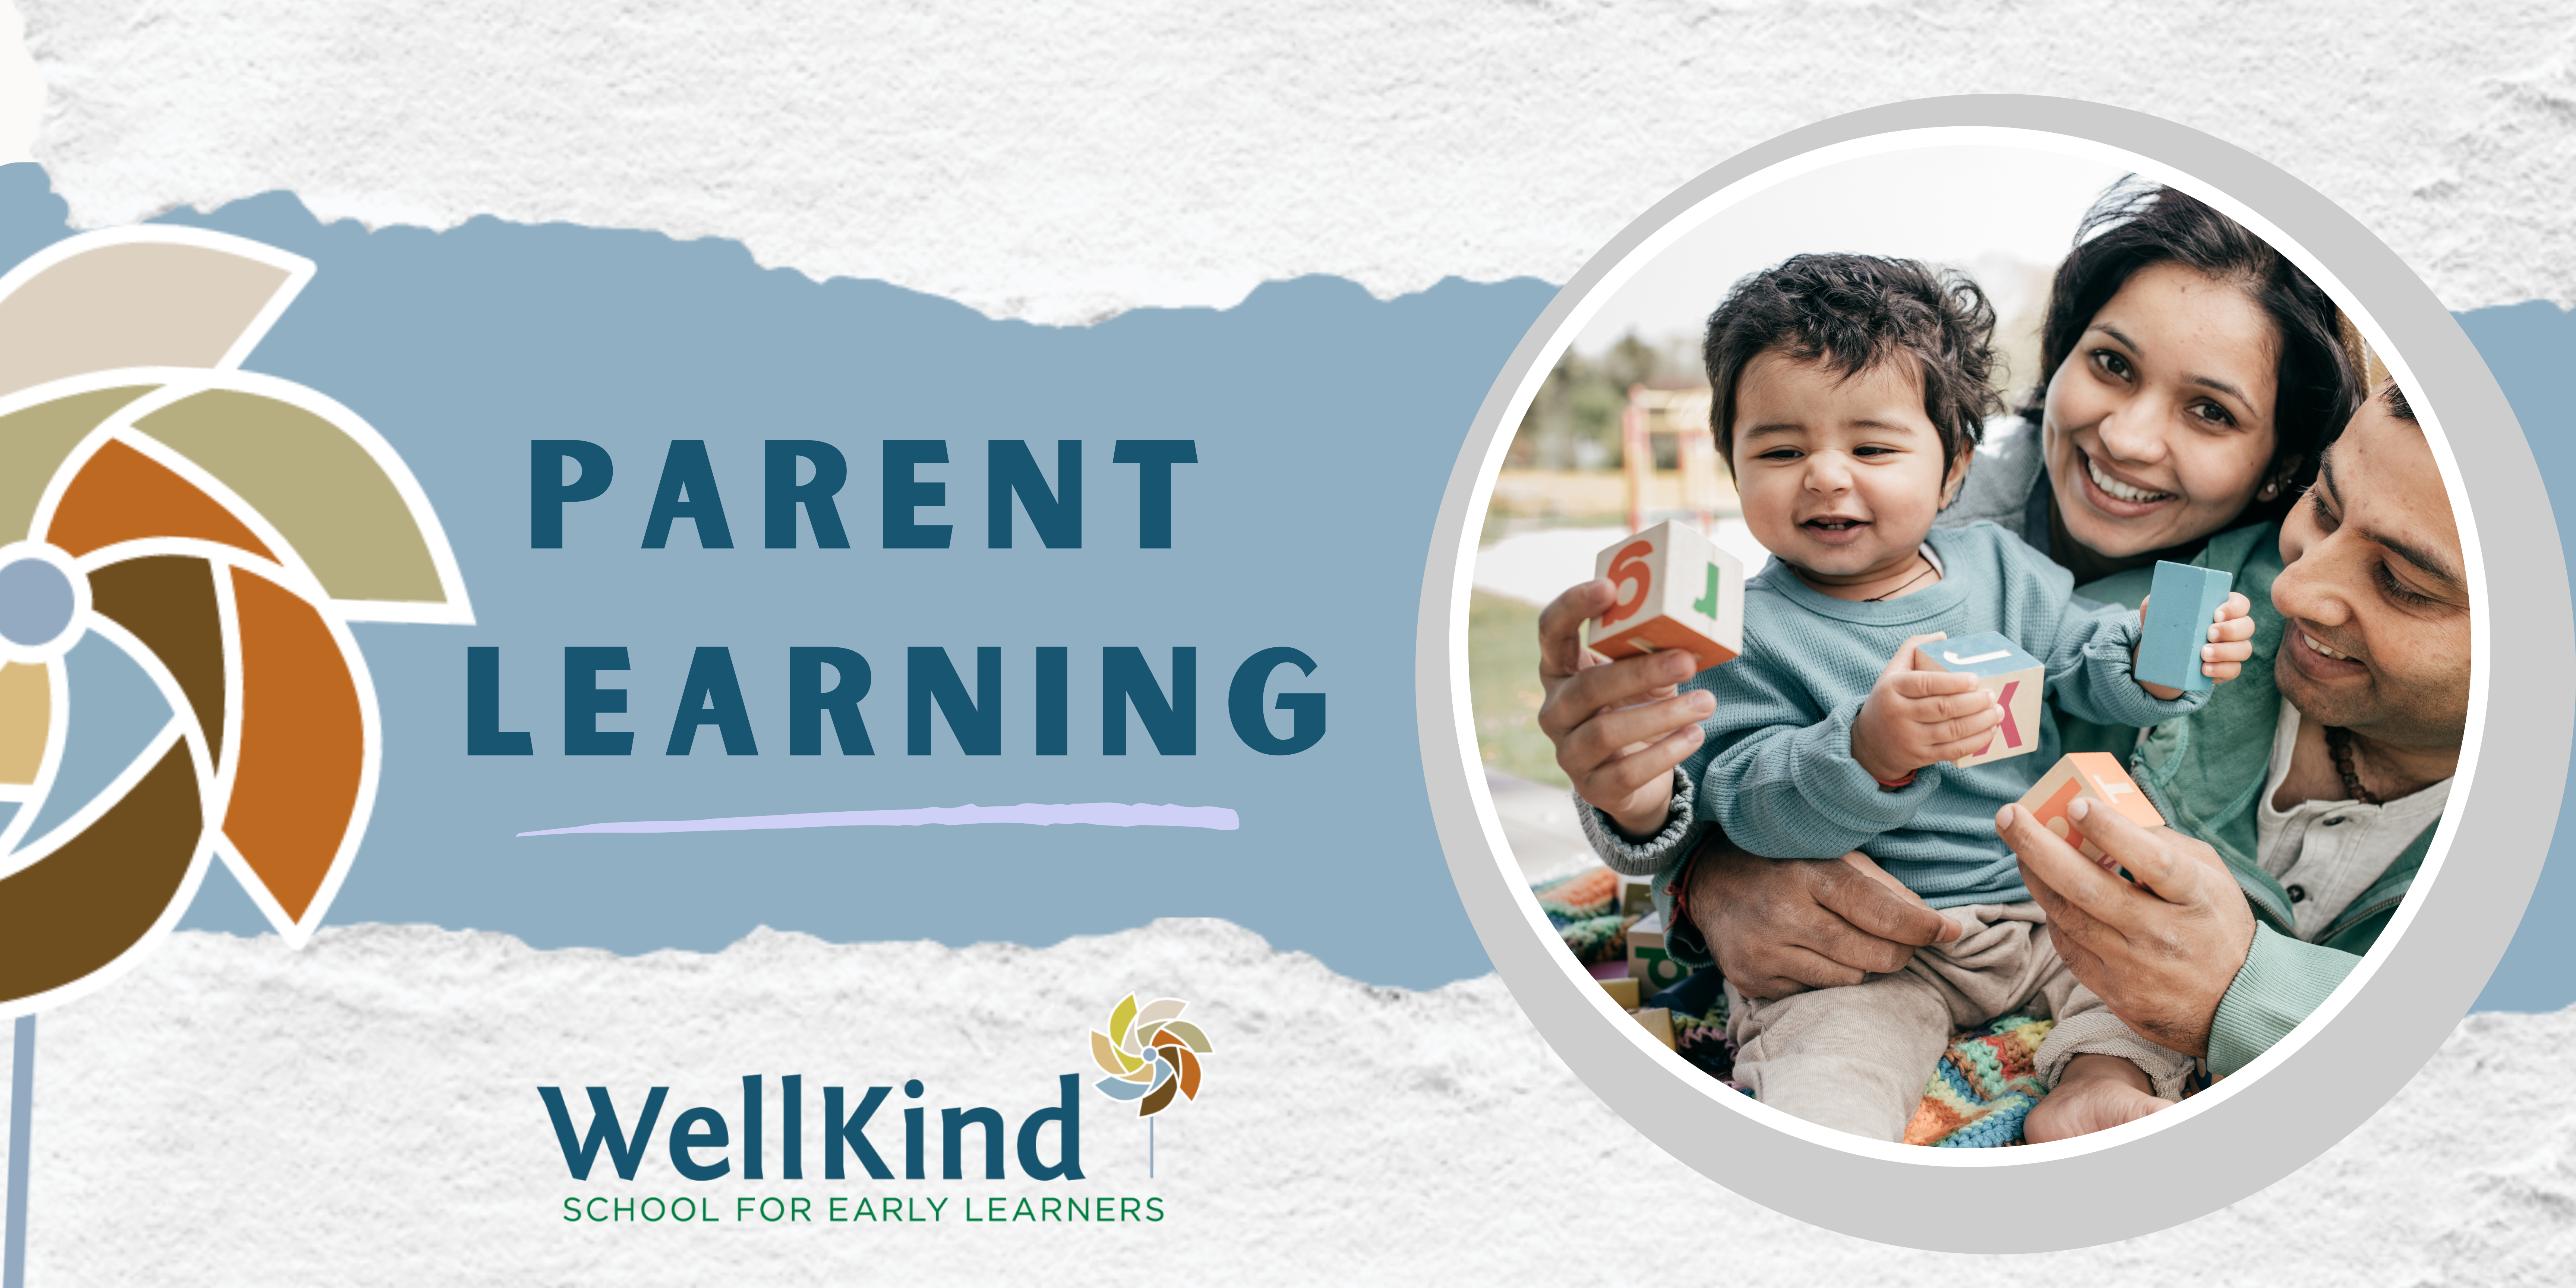 Parent Learning at WellKind School for Early Learners